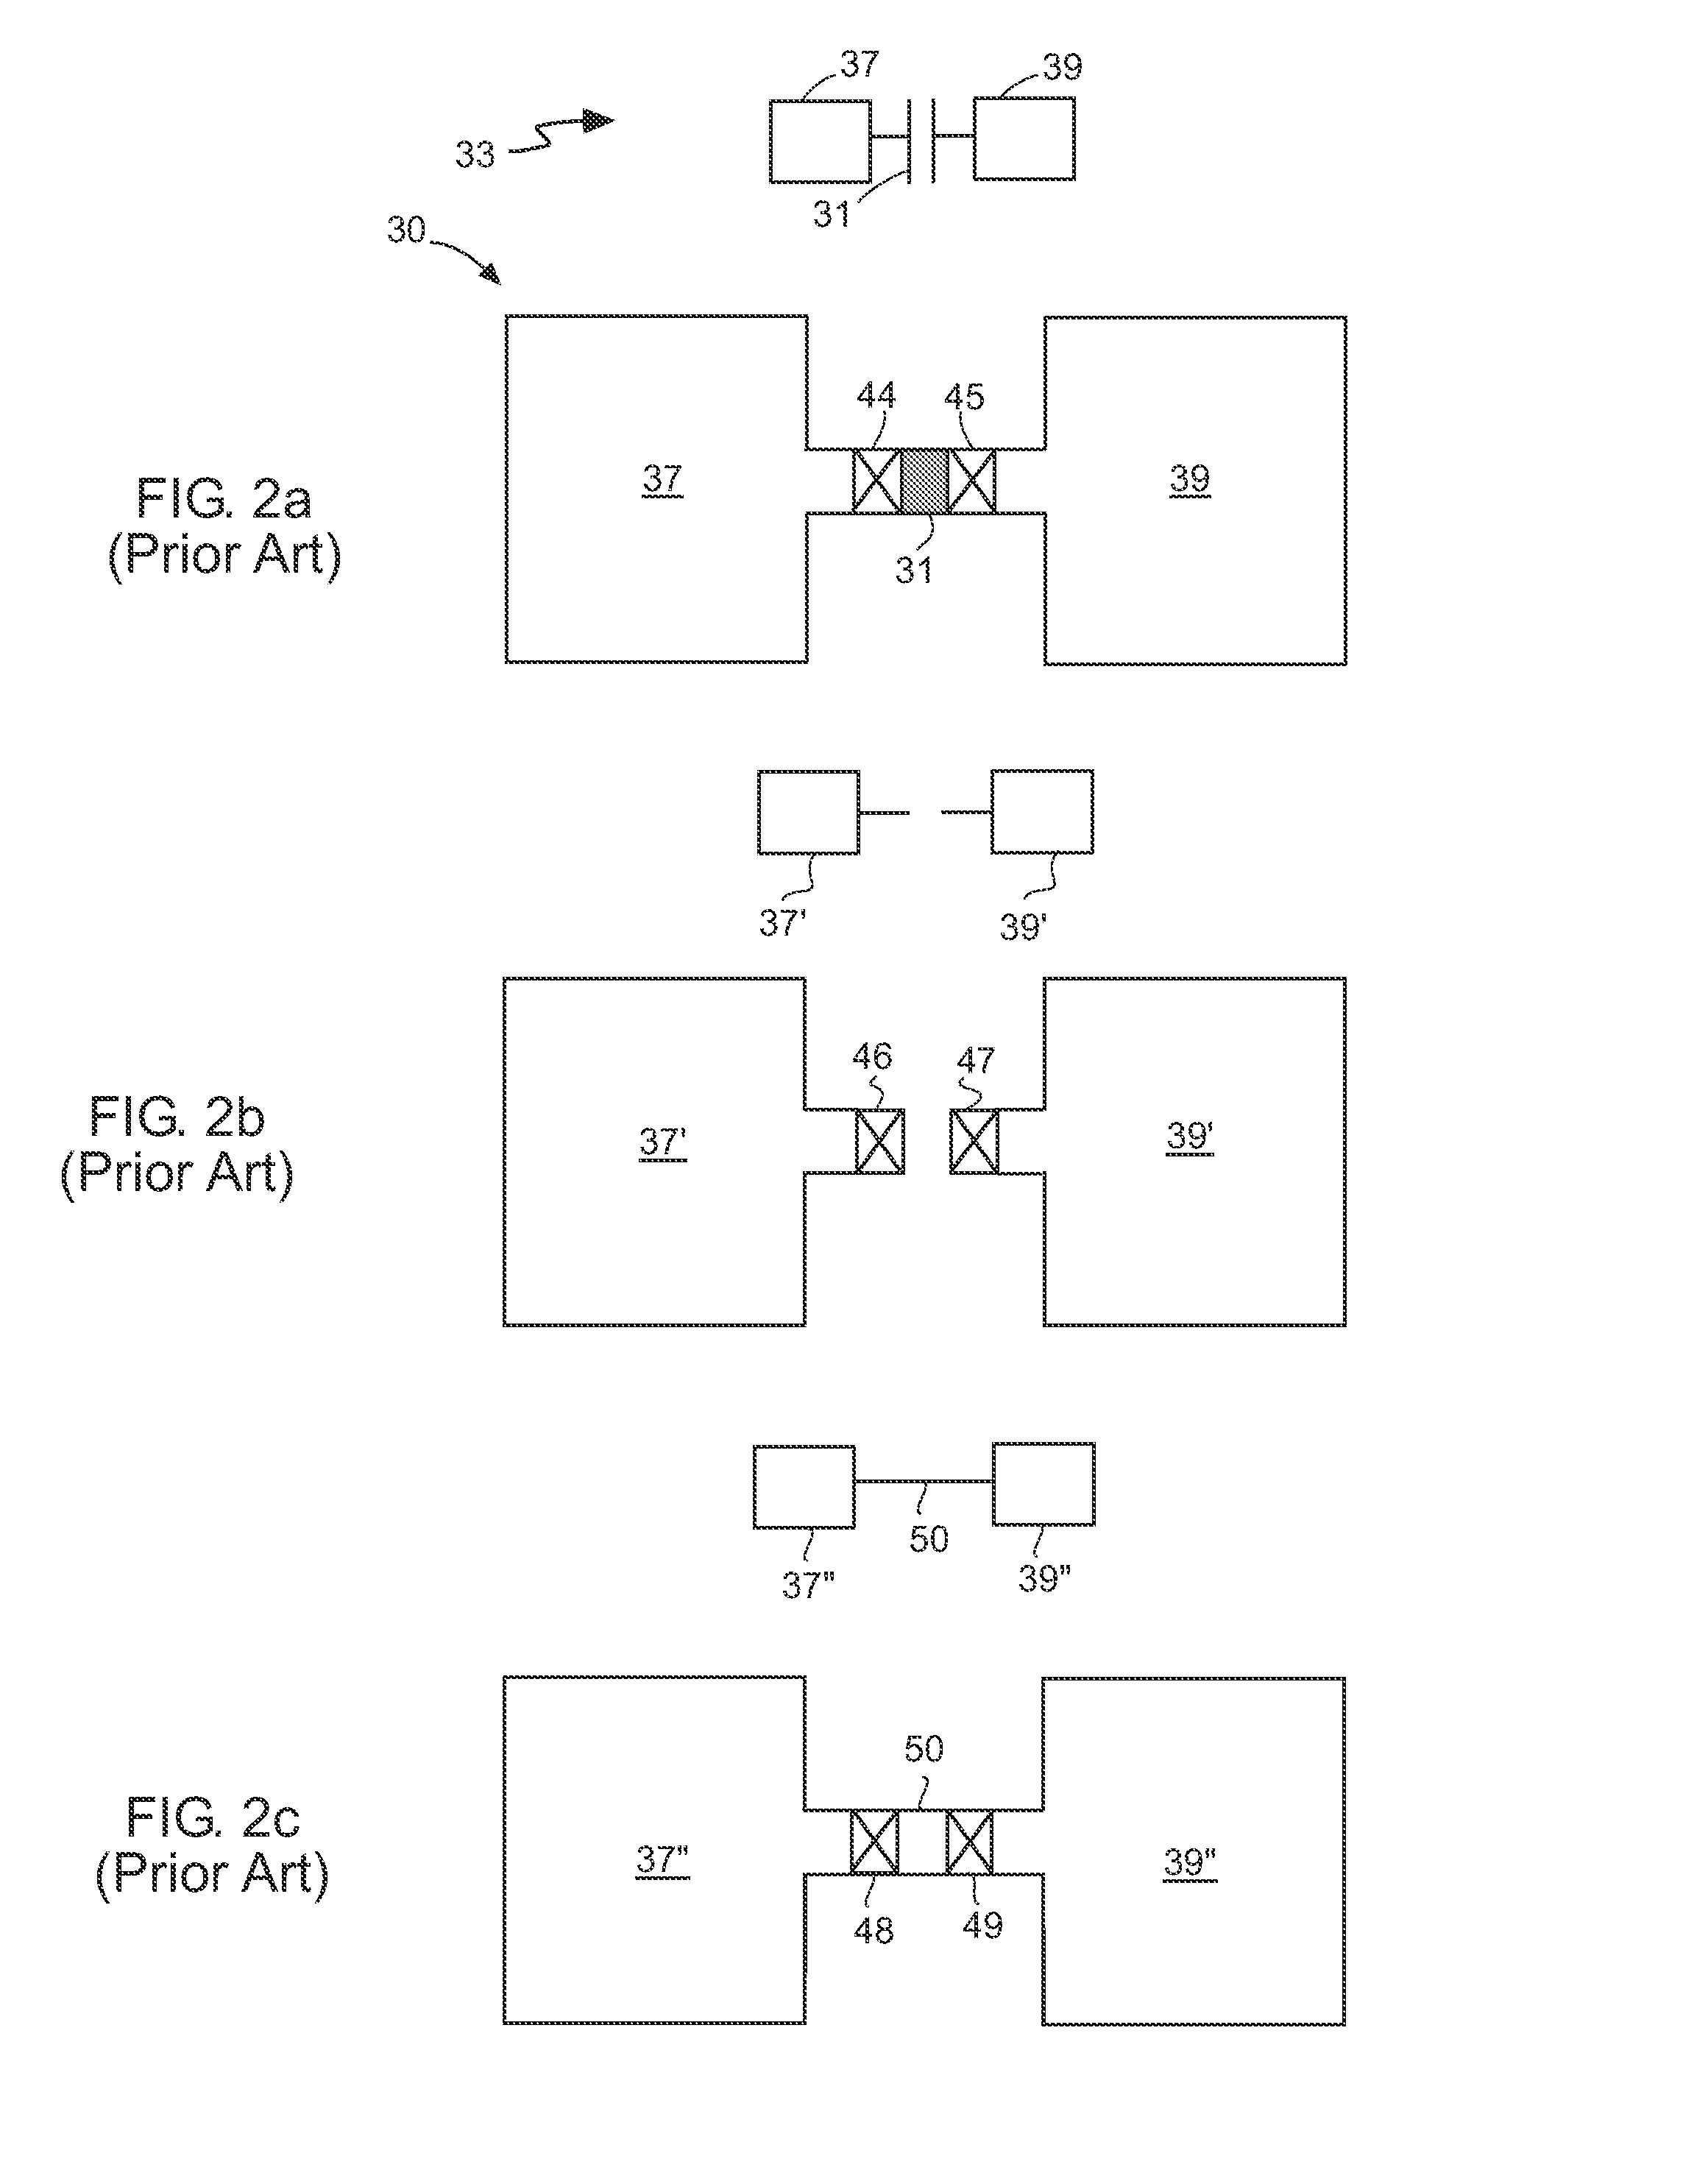 Universal padset concept for high-frequency probing